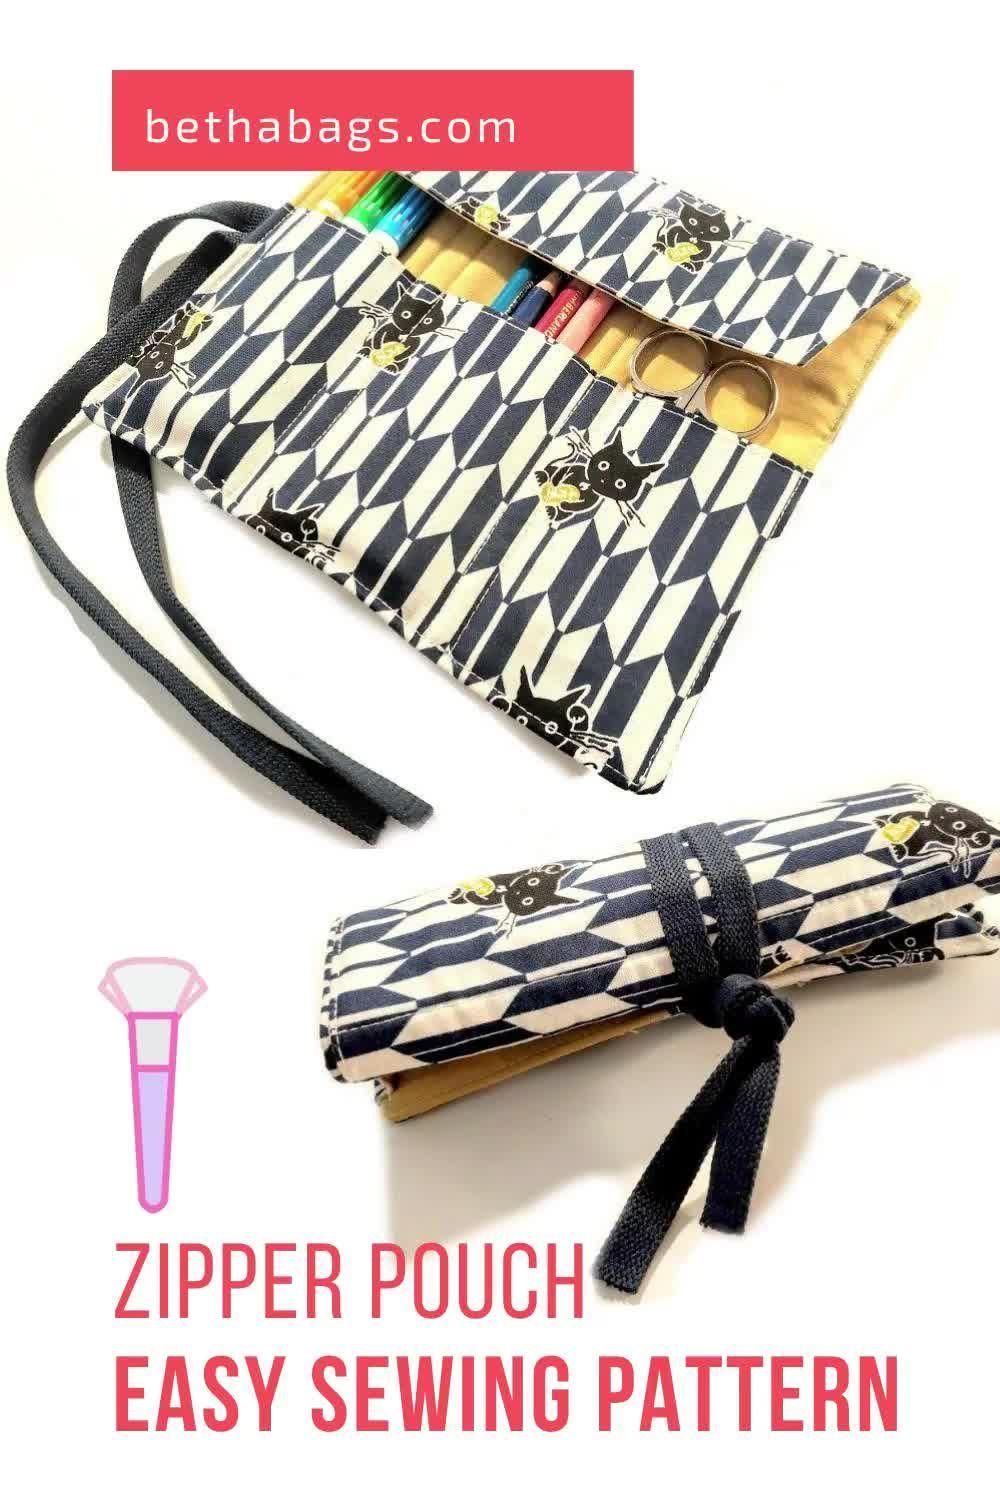 Roll Up Pencil Case Sewing Pattern PDF - Roll Up Pencil Case Sewing Pattern PDF -   19 fabric crafts diy no sew ideas